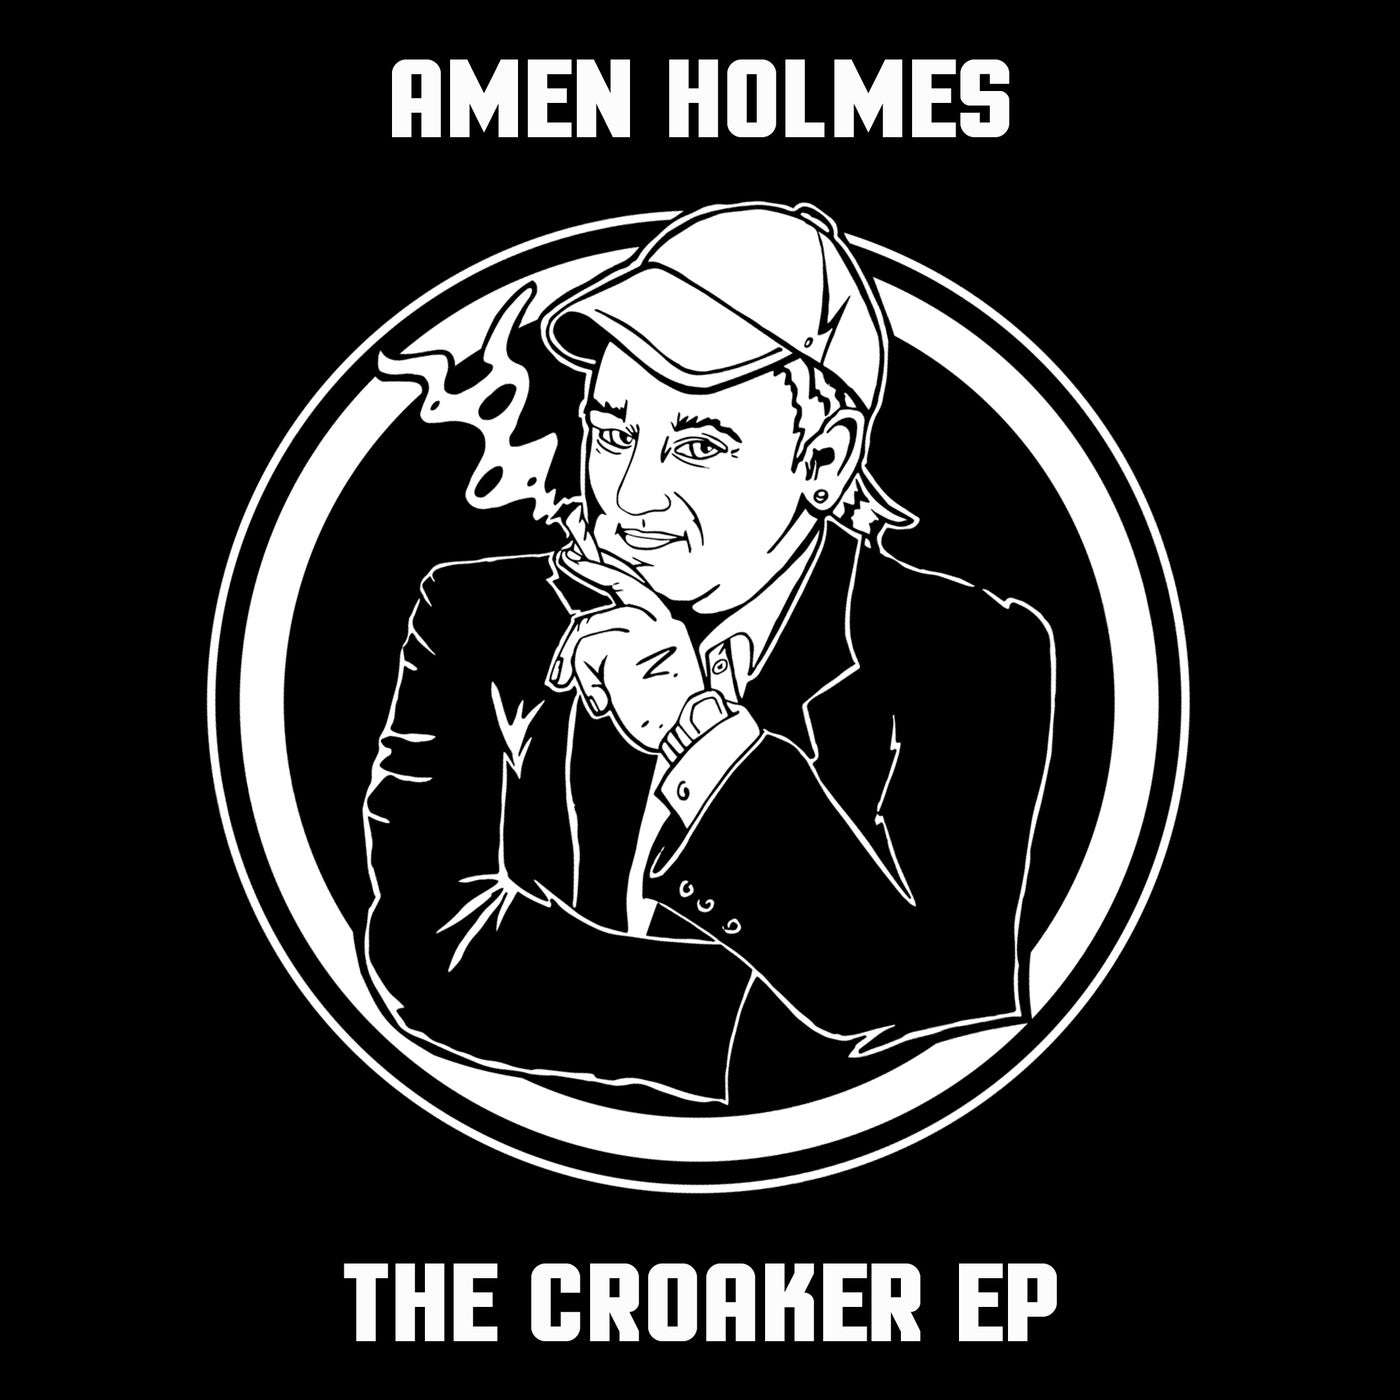 The Croaker EP